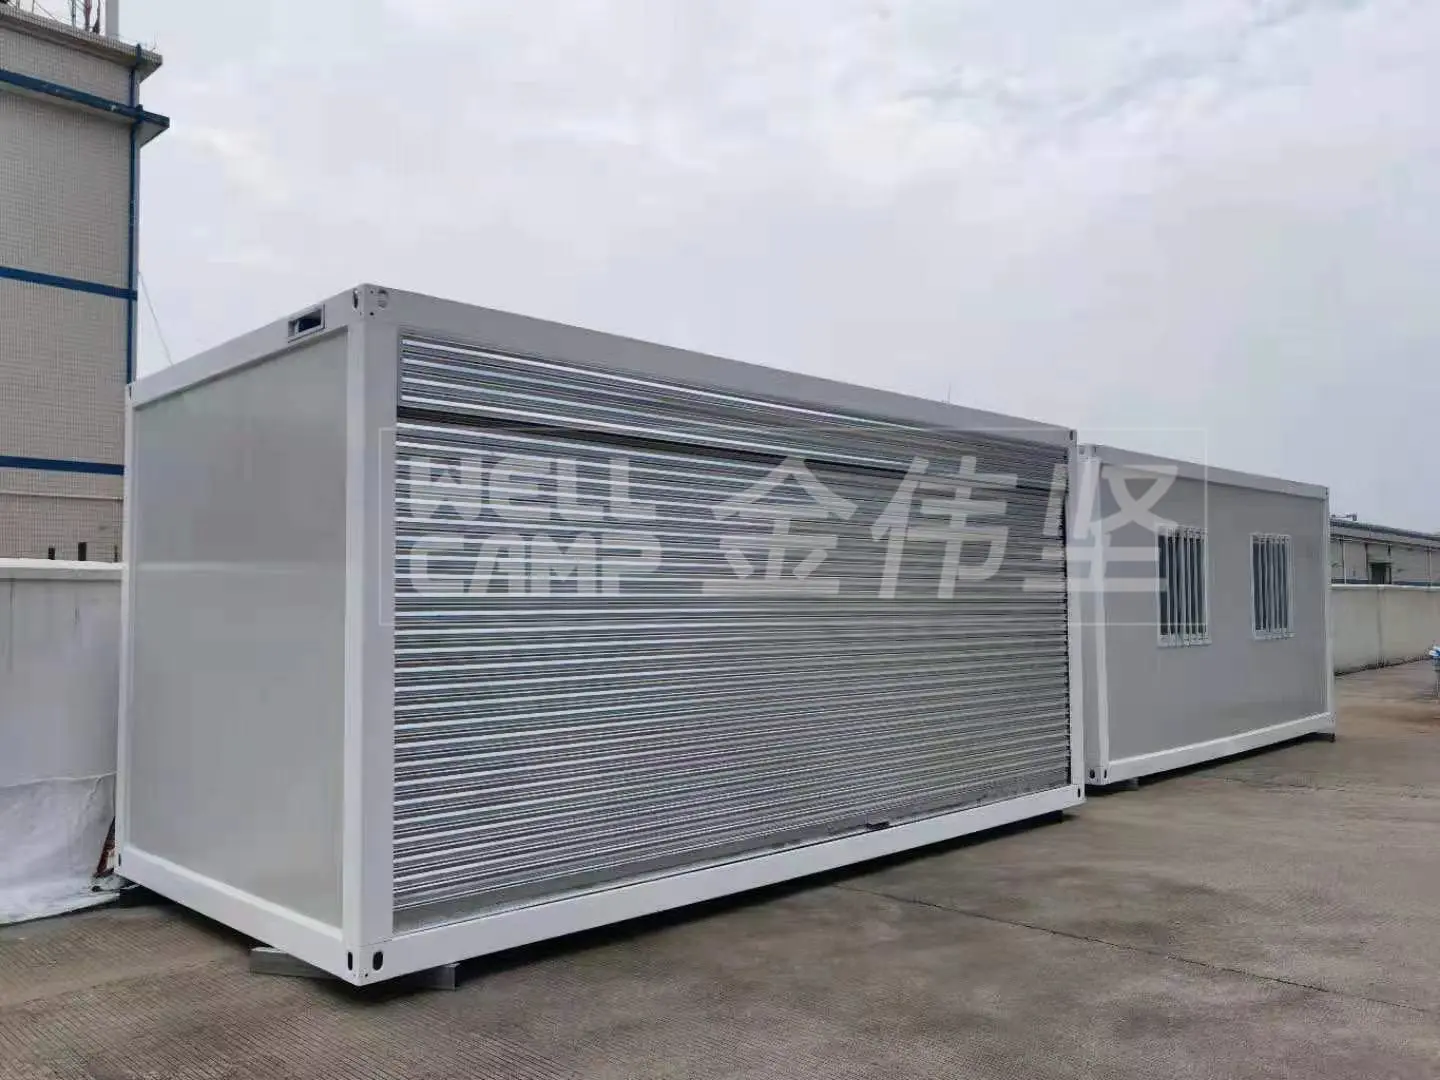 Flat Pack Container Storage/Shop With Rolling Gate